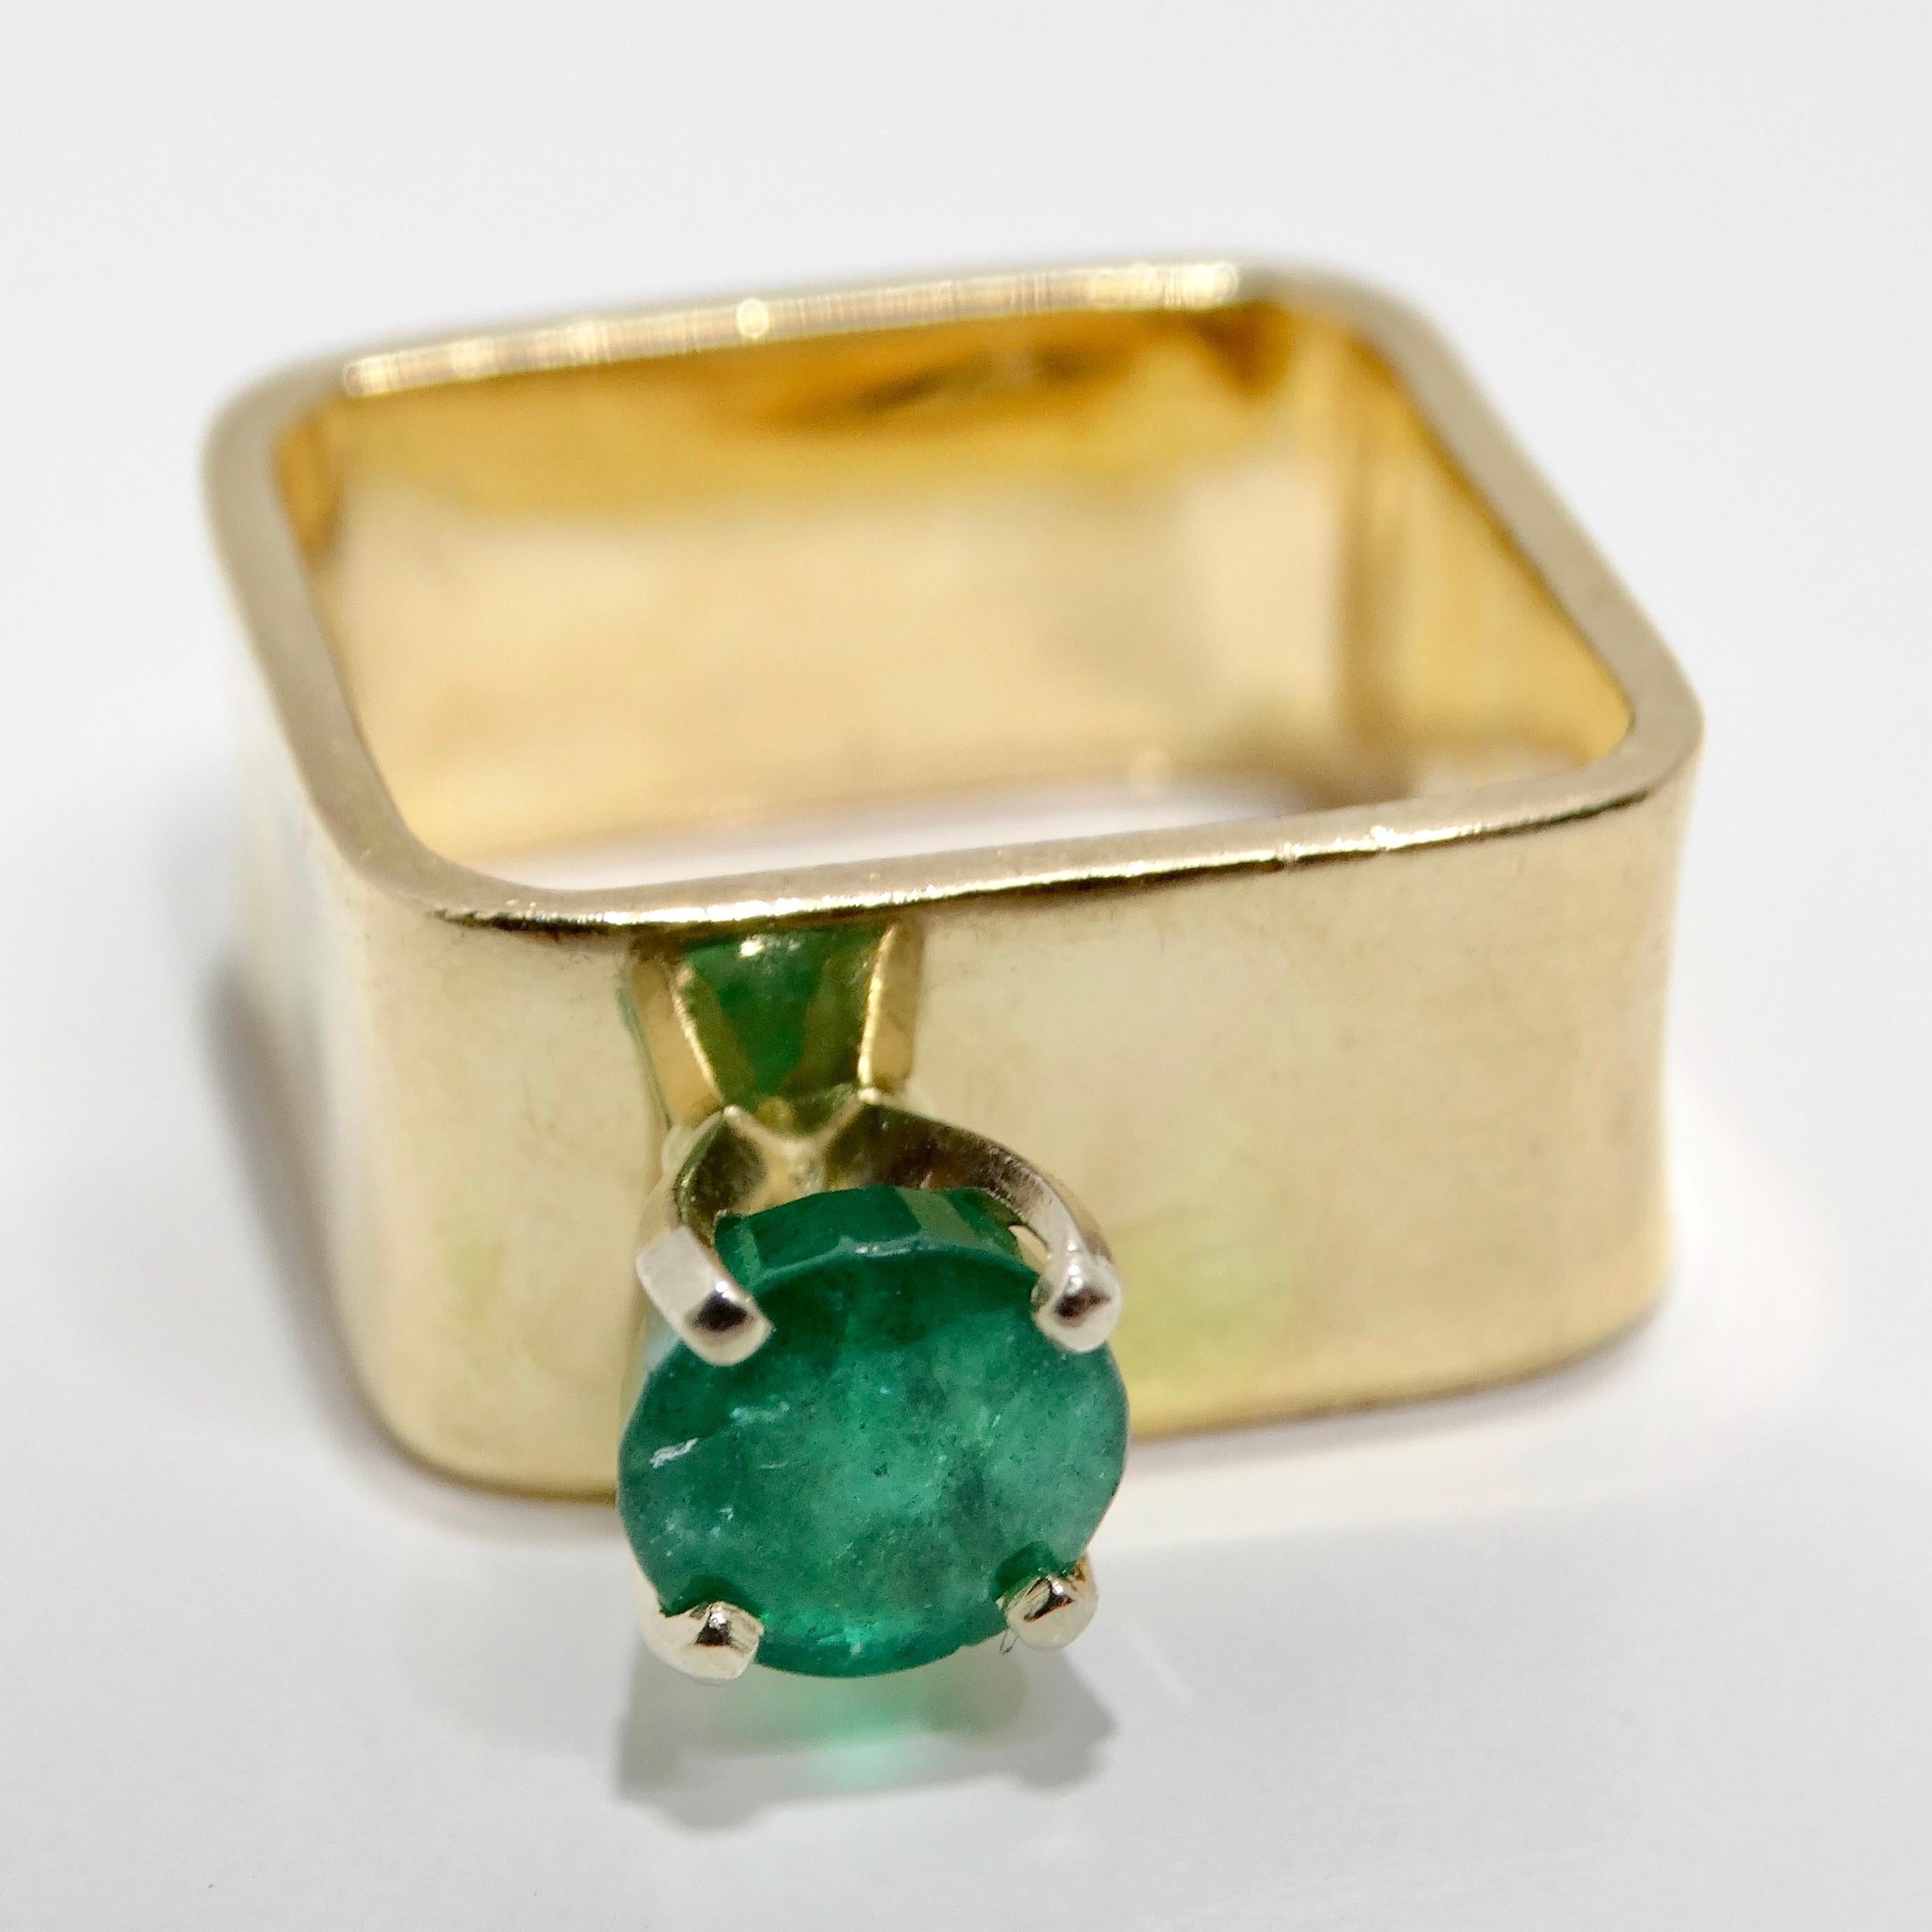 Introducing the breathtaking 14K Gold Colombian Emerald Square Cocktail Ring, a vintage masterpiece that exudes elegance and sophistication. Crafted in 1970, this stunning ring features a square-shaped Colombian emerald of deep, dark green hue,